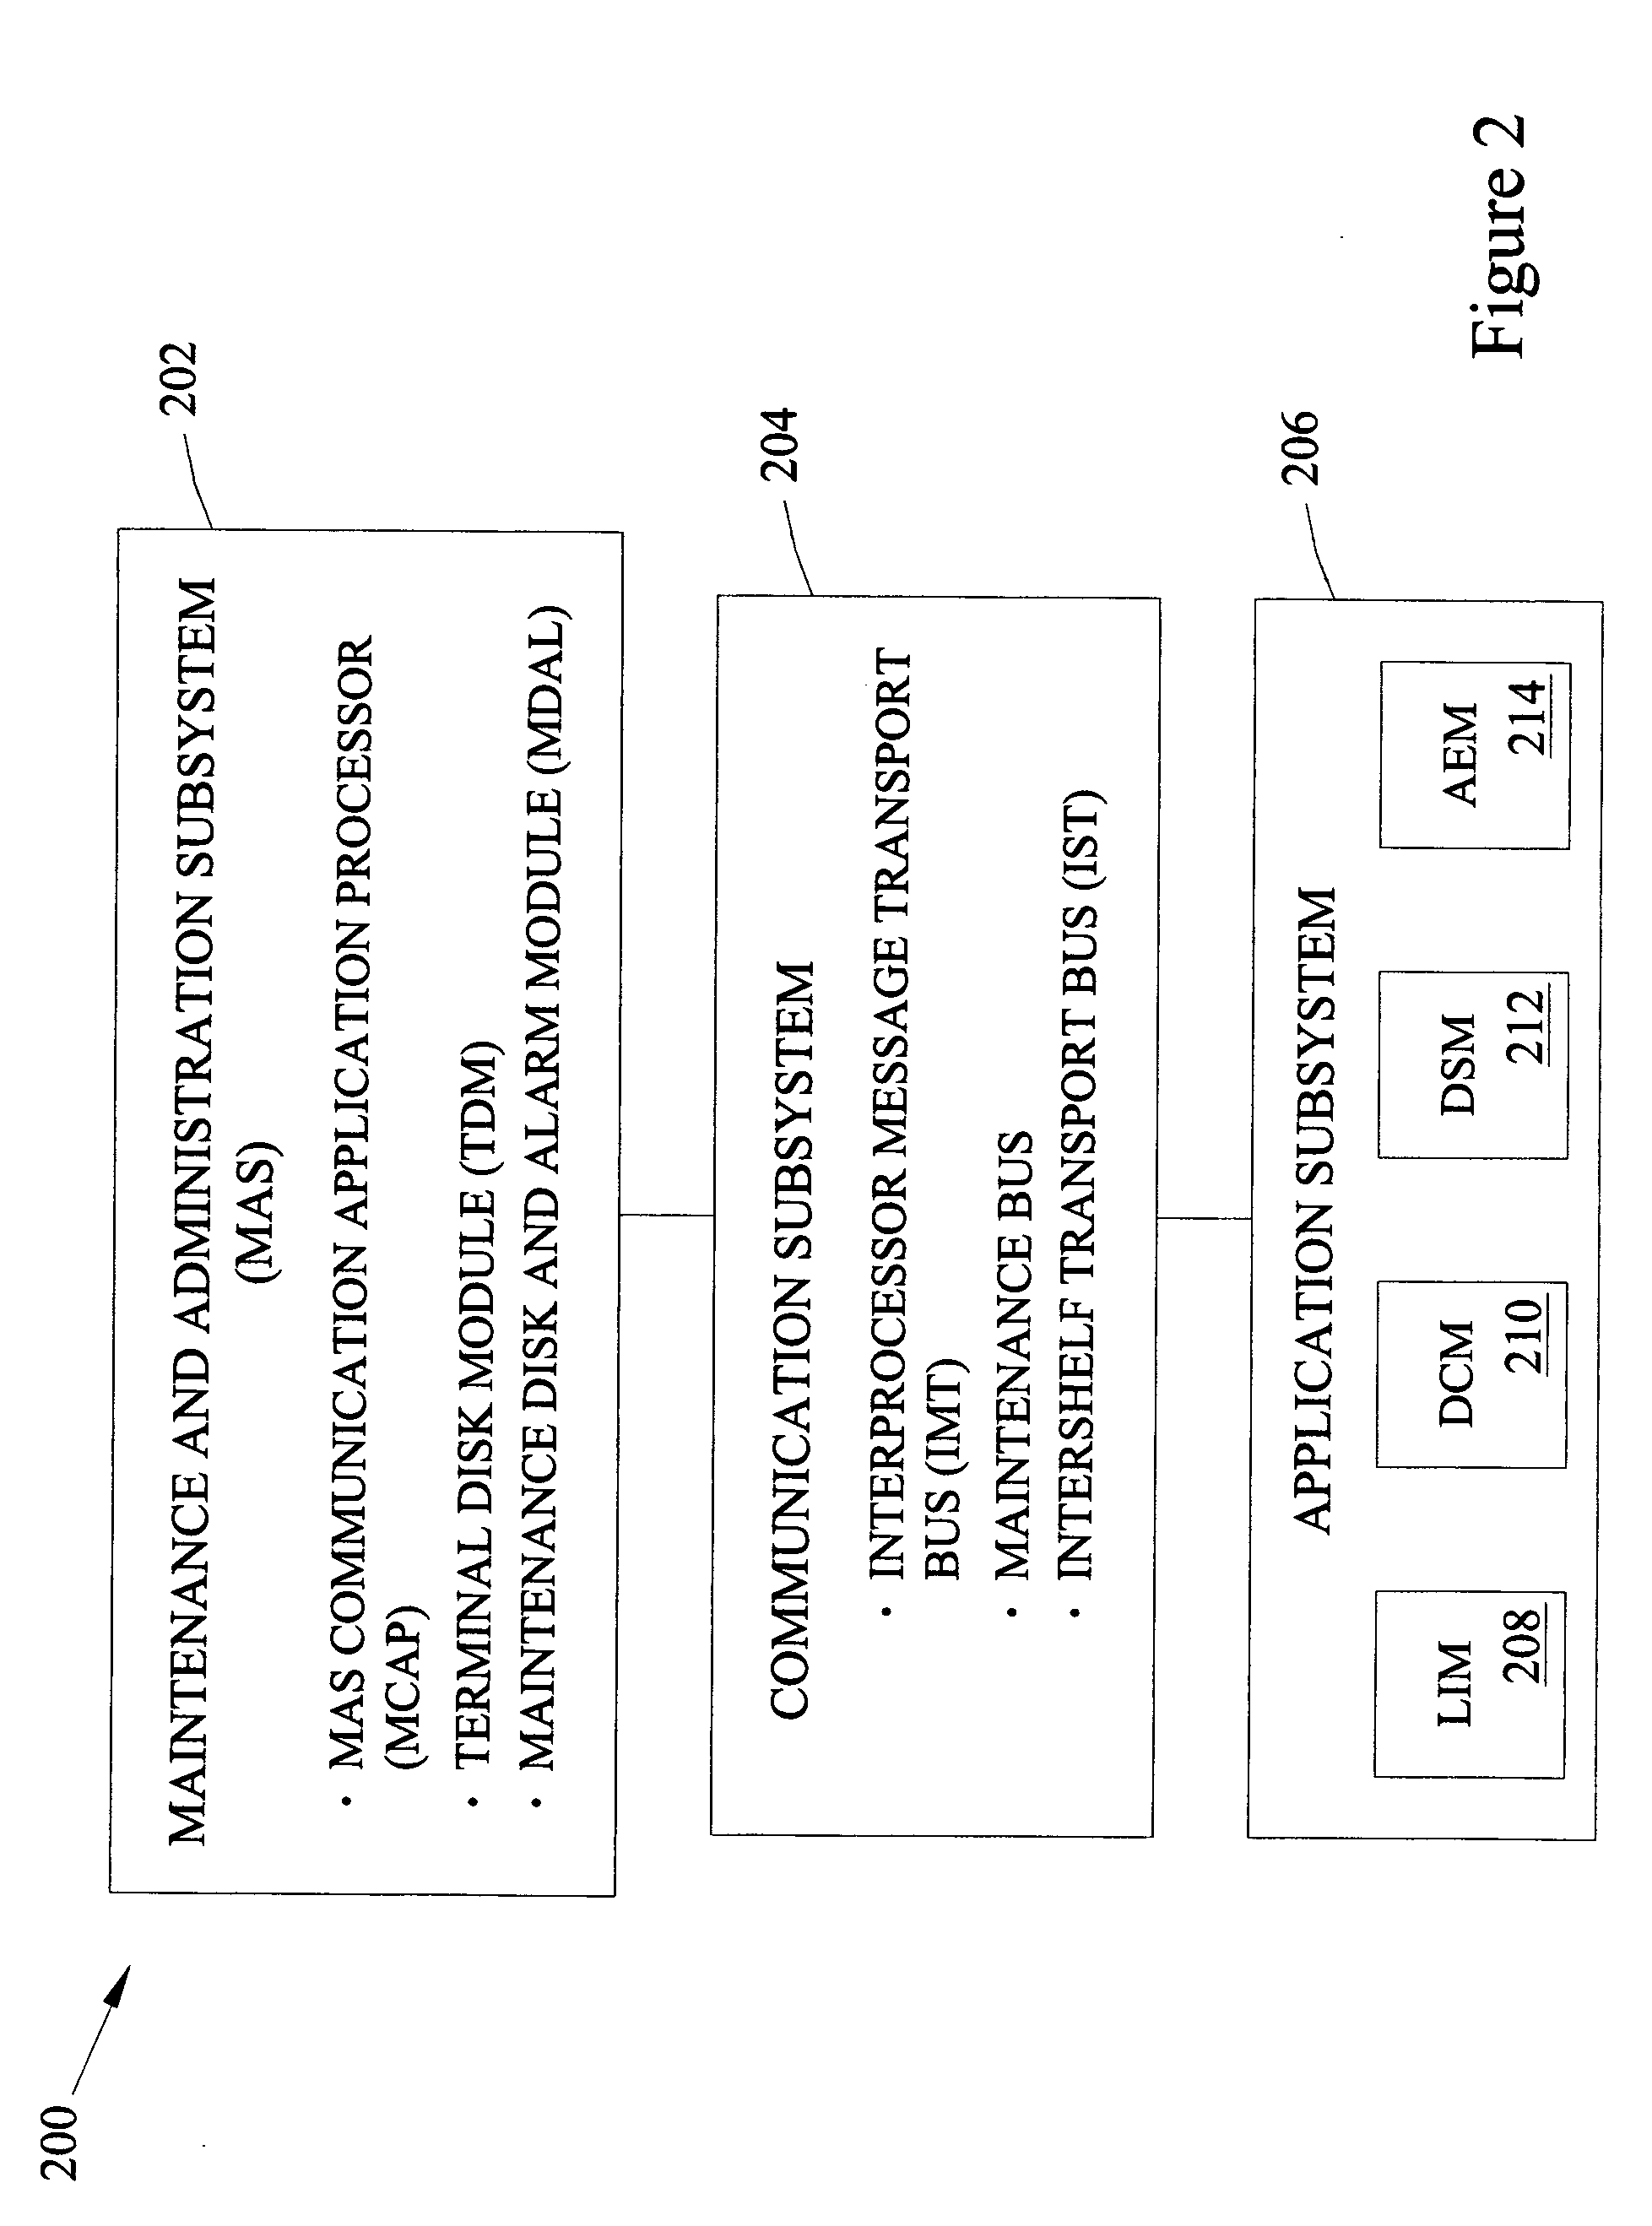 Methods and systems for providing short message gateway functionality in a telecommunications network